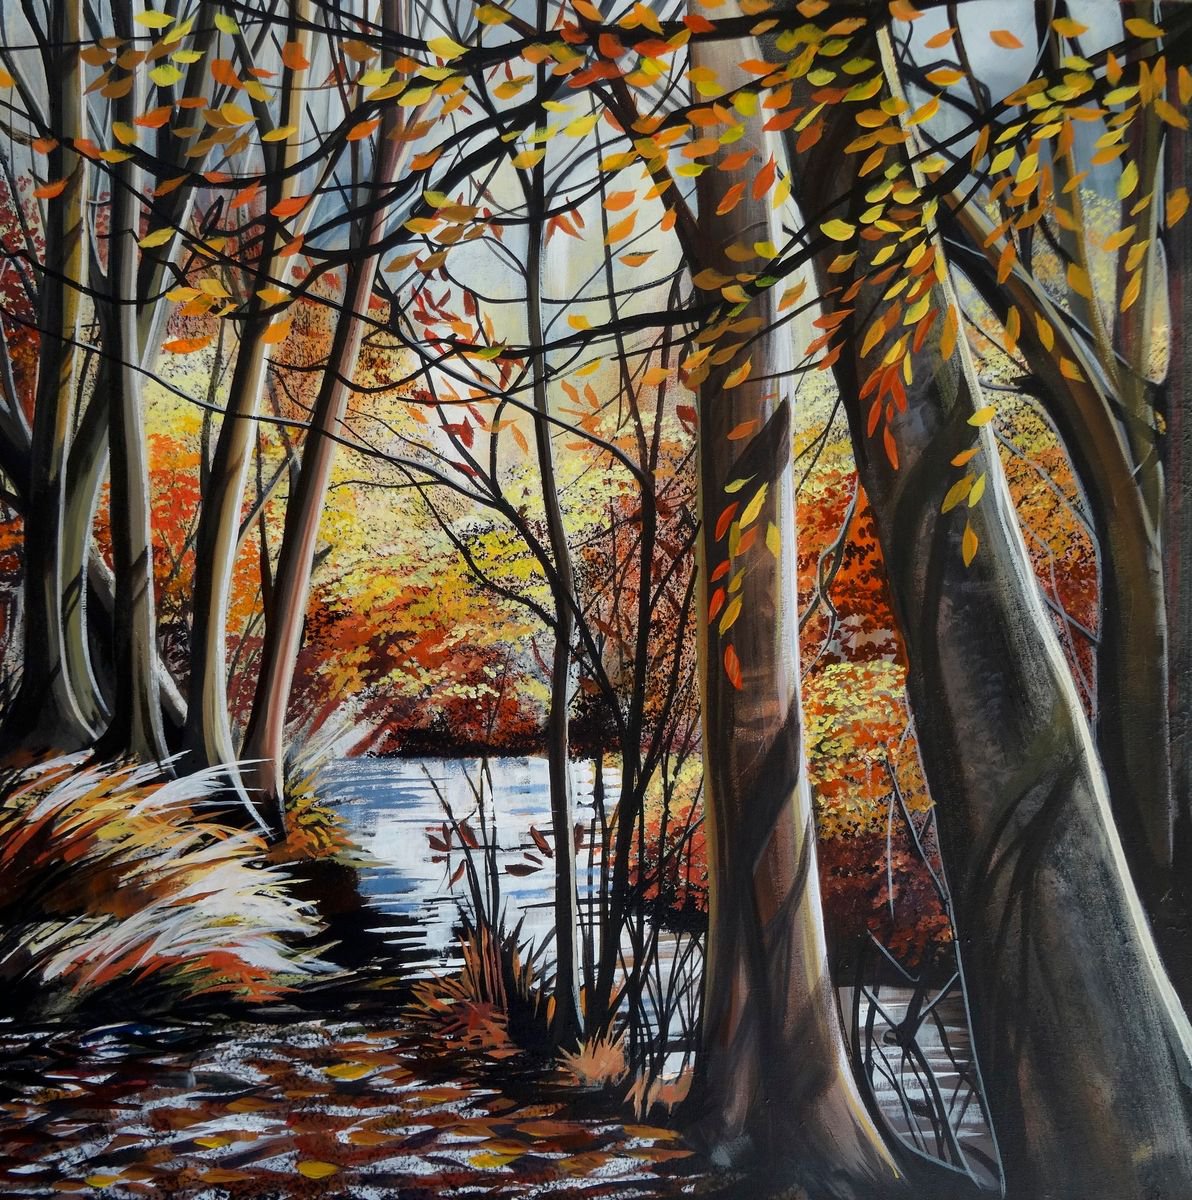 autumn leaves painting